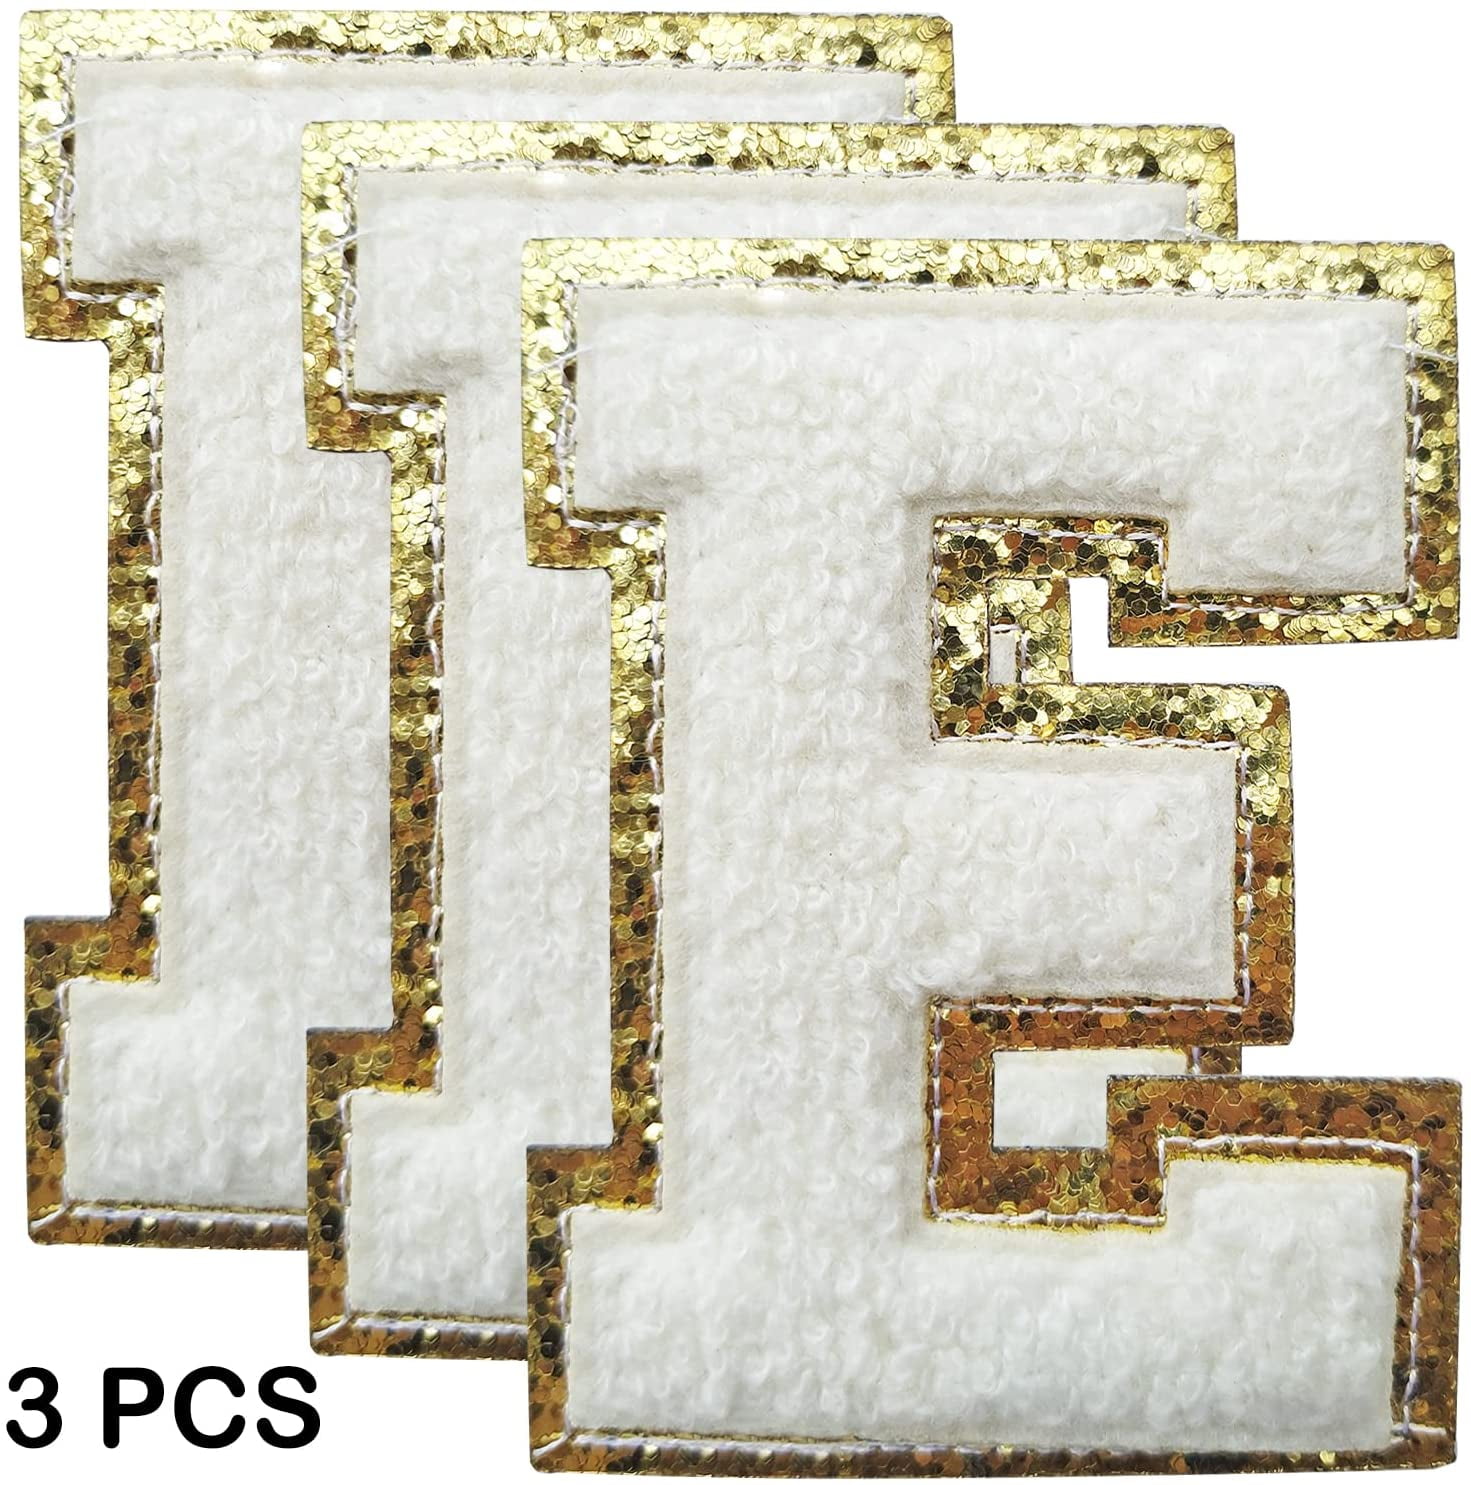 Stick on Letters Chenille Stick on Patch Stoney Clover Lane Letter White  Stick on Chenille Letter Adhesive Letter Self Adhesive Chenille 